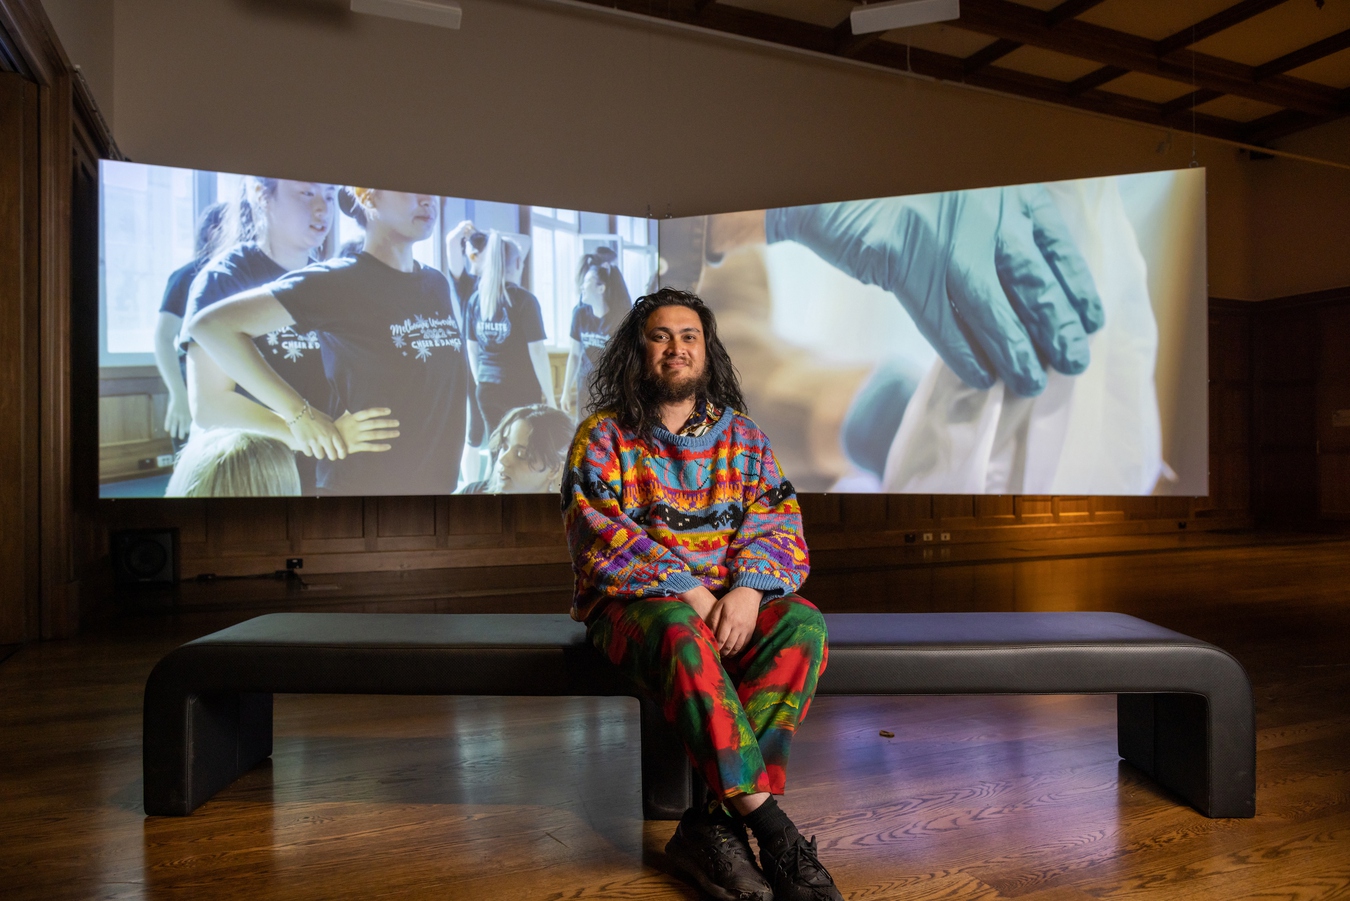 Image: Andy Butler, The Agony and the Ecstasy, 2022. Two channel video, sound, colour. 8 min. University of Melbourne Art Collection. Photo credit: Christian Capurro.